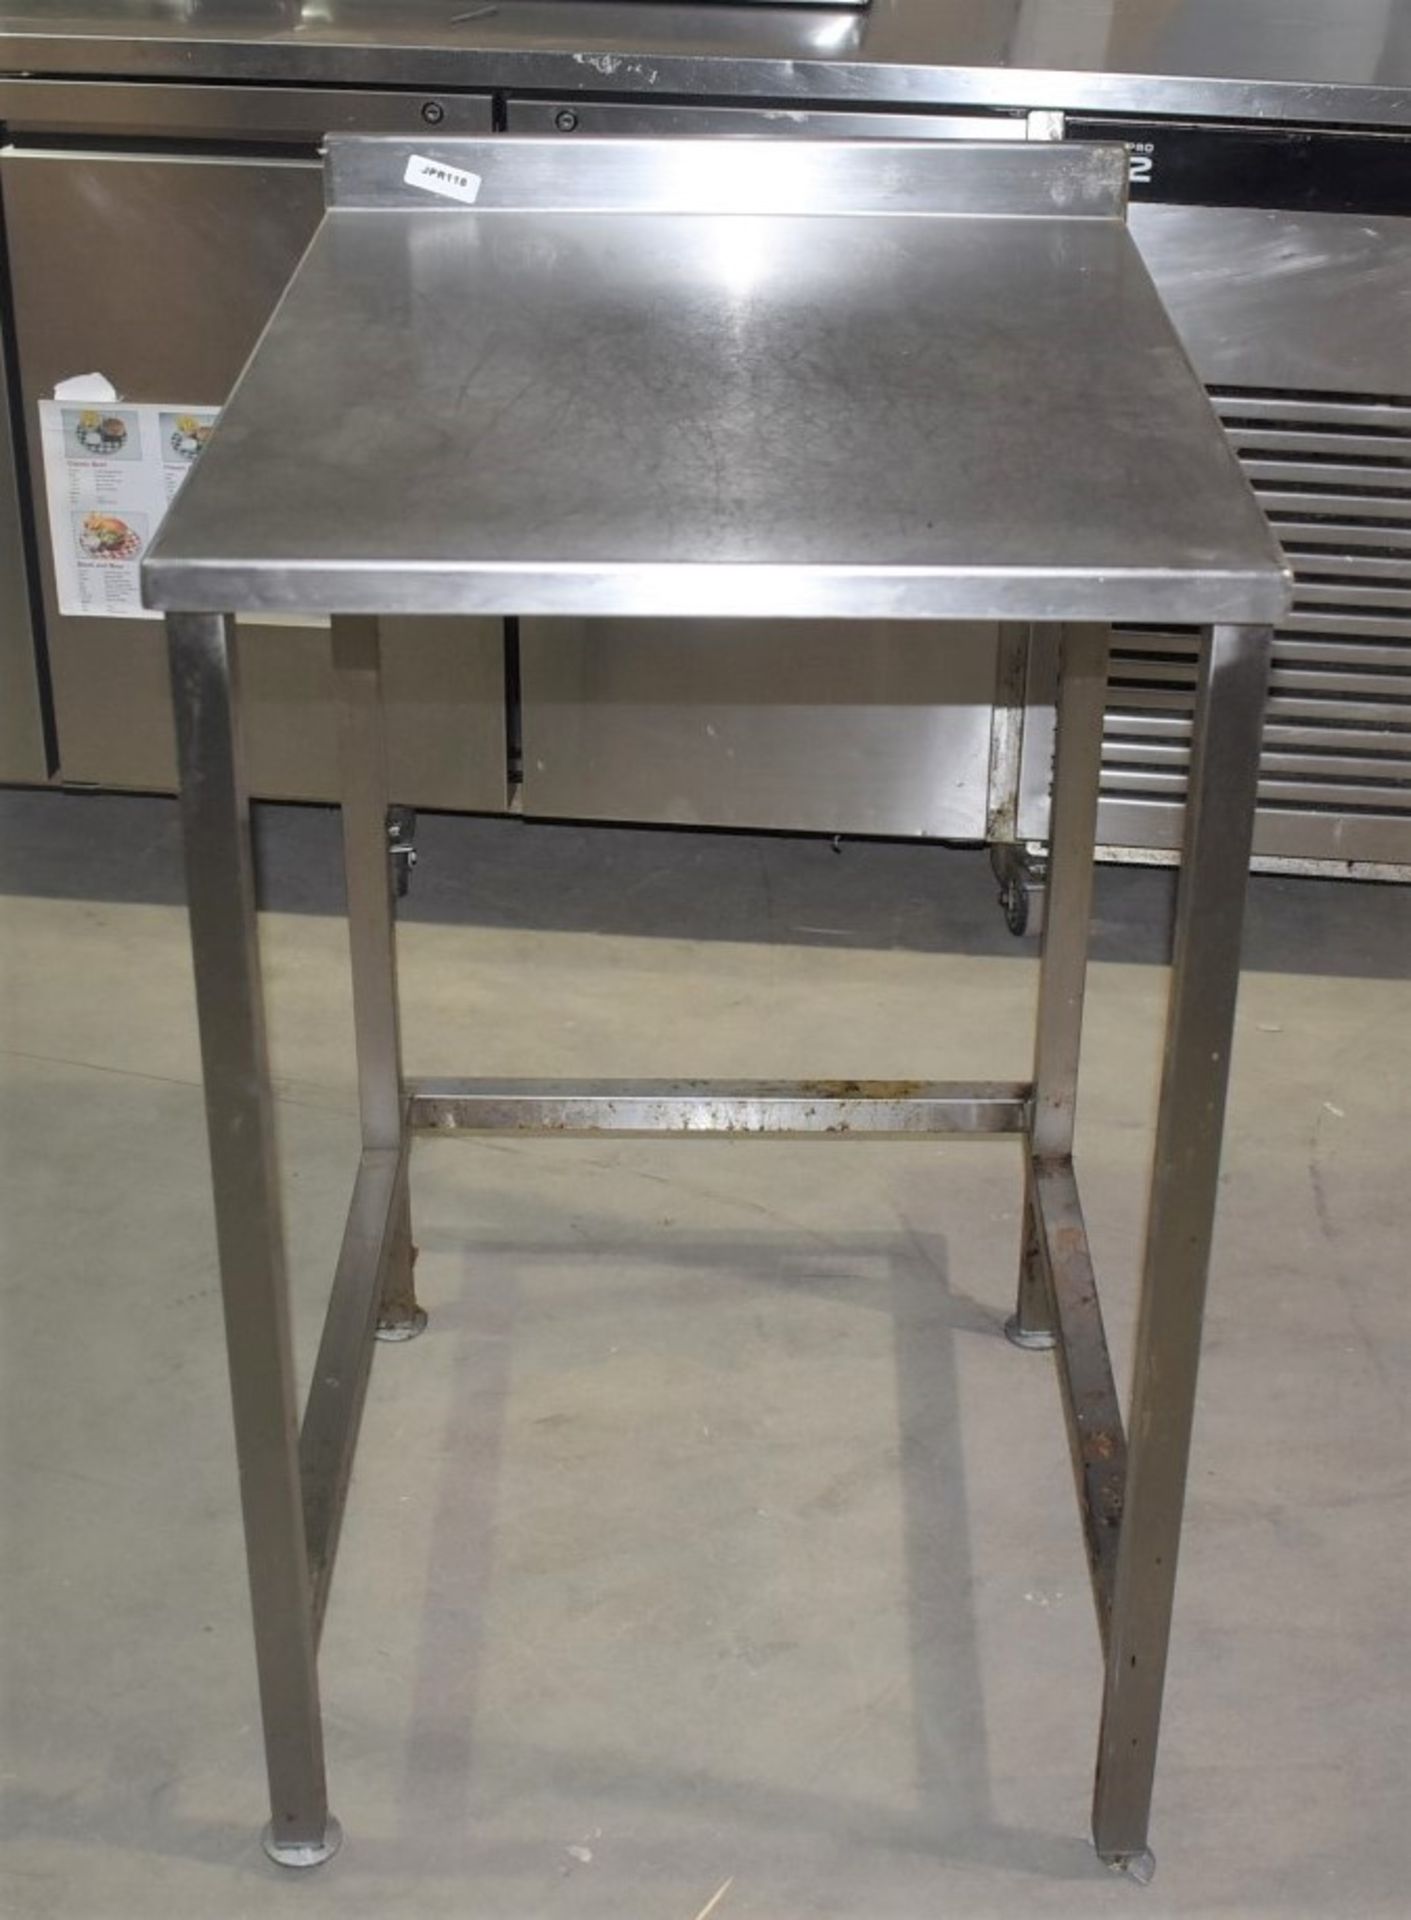 1 x Stainless Steel Prep Table - Size: H87 x W55 x D70 cms - Image 3 of 4